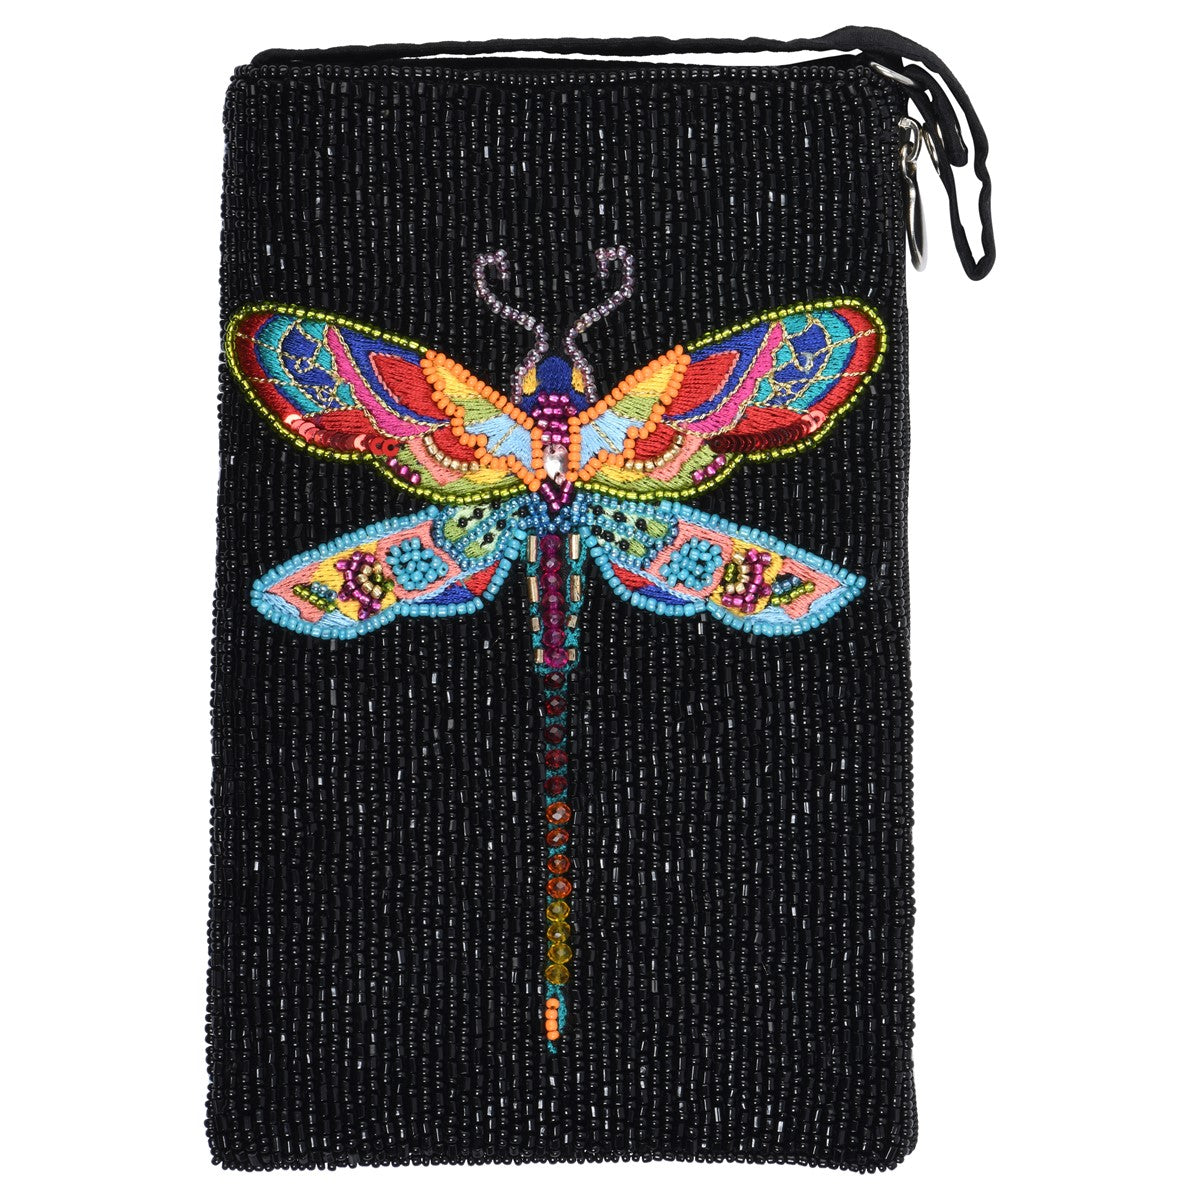 Bamboo Trading Co. Club Bag Colorful Dragonfly